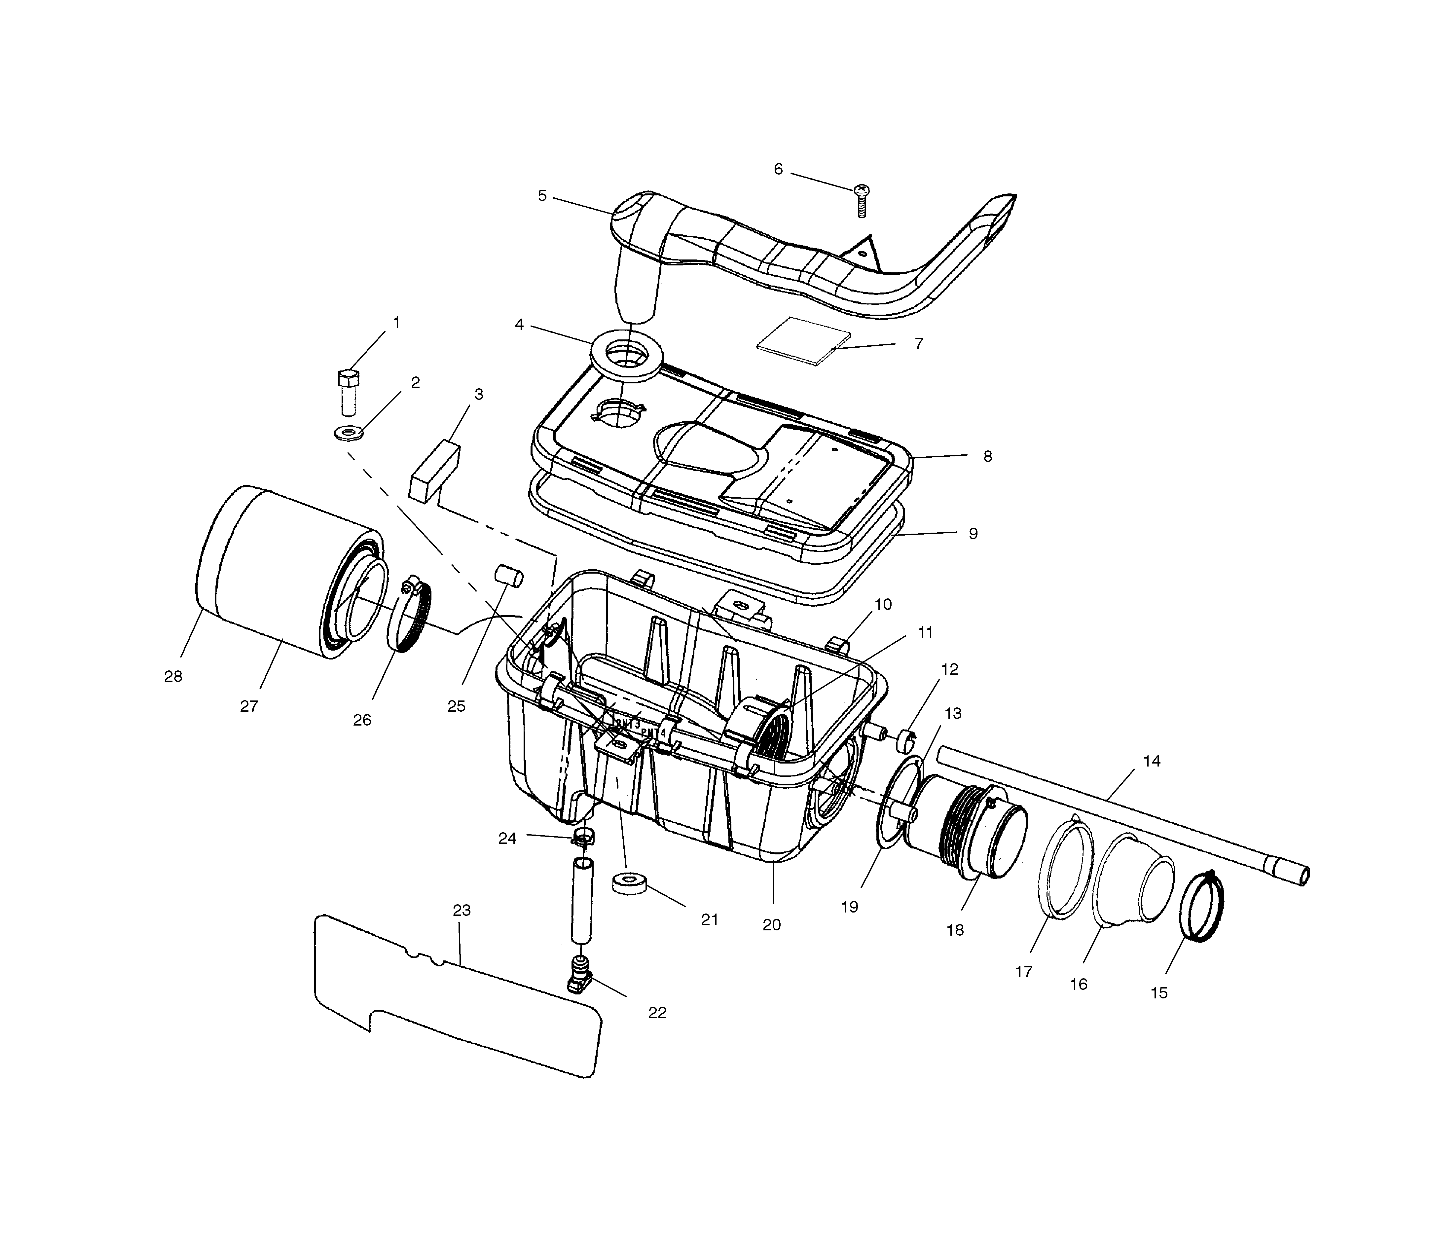 Part Number : 5433767 DUCT INLET